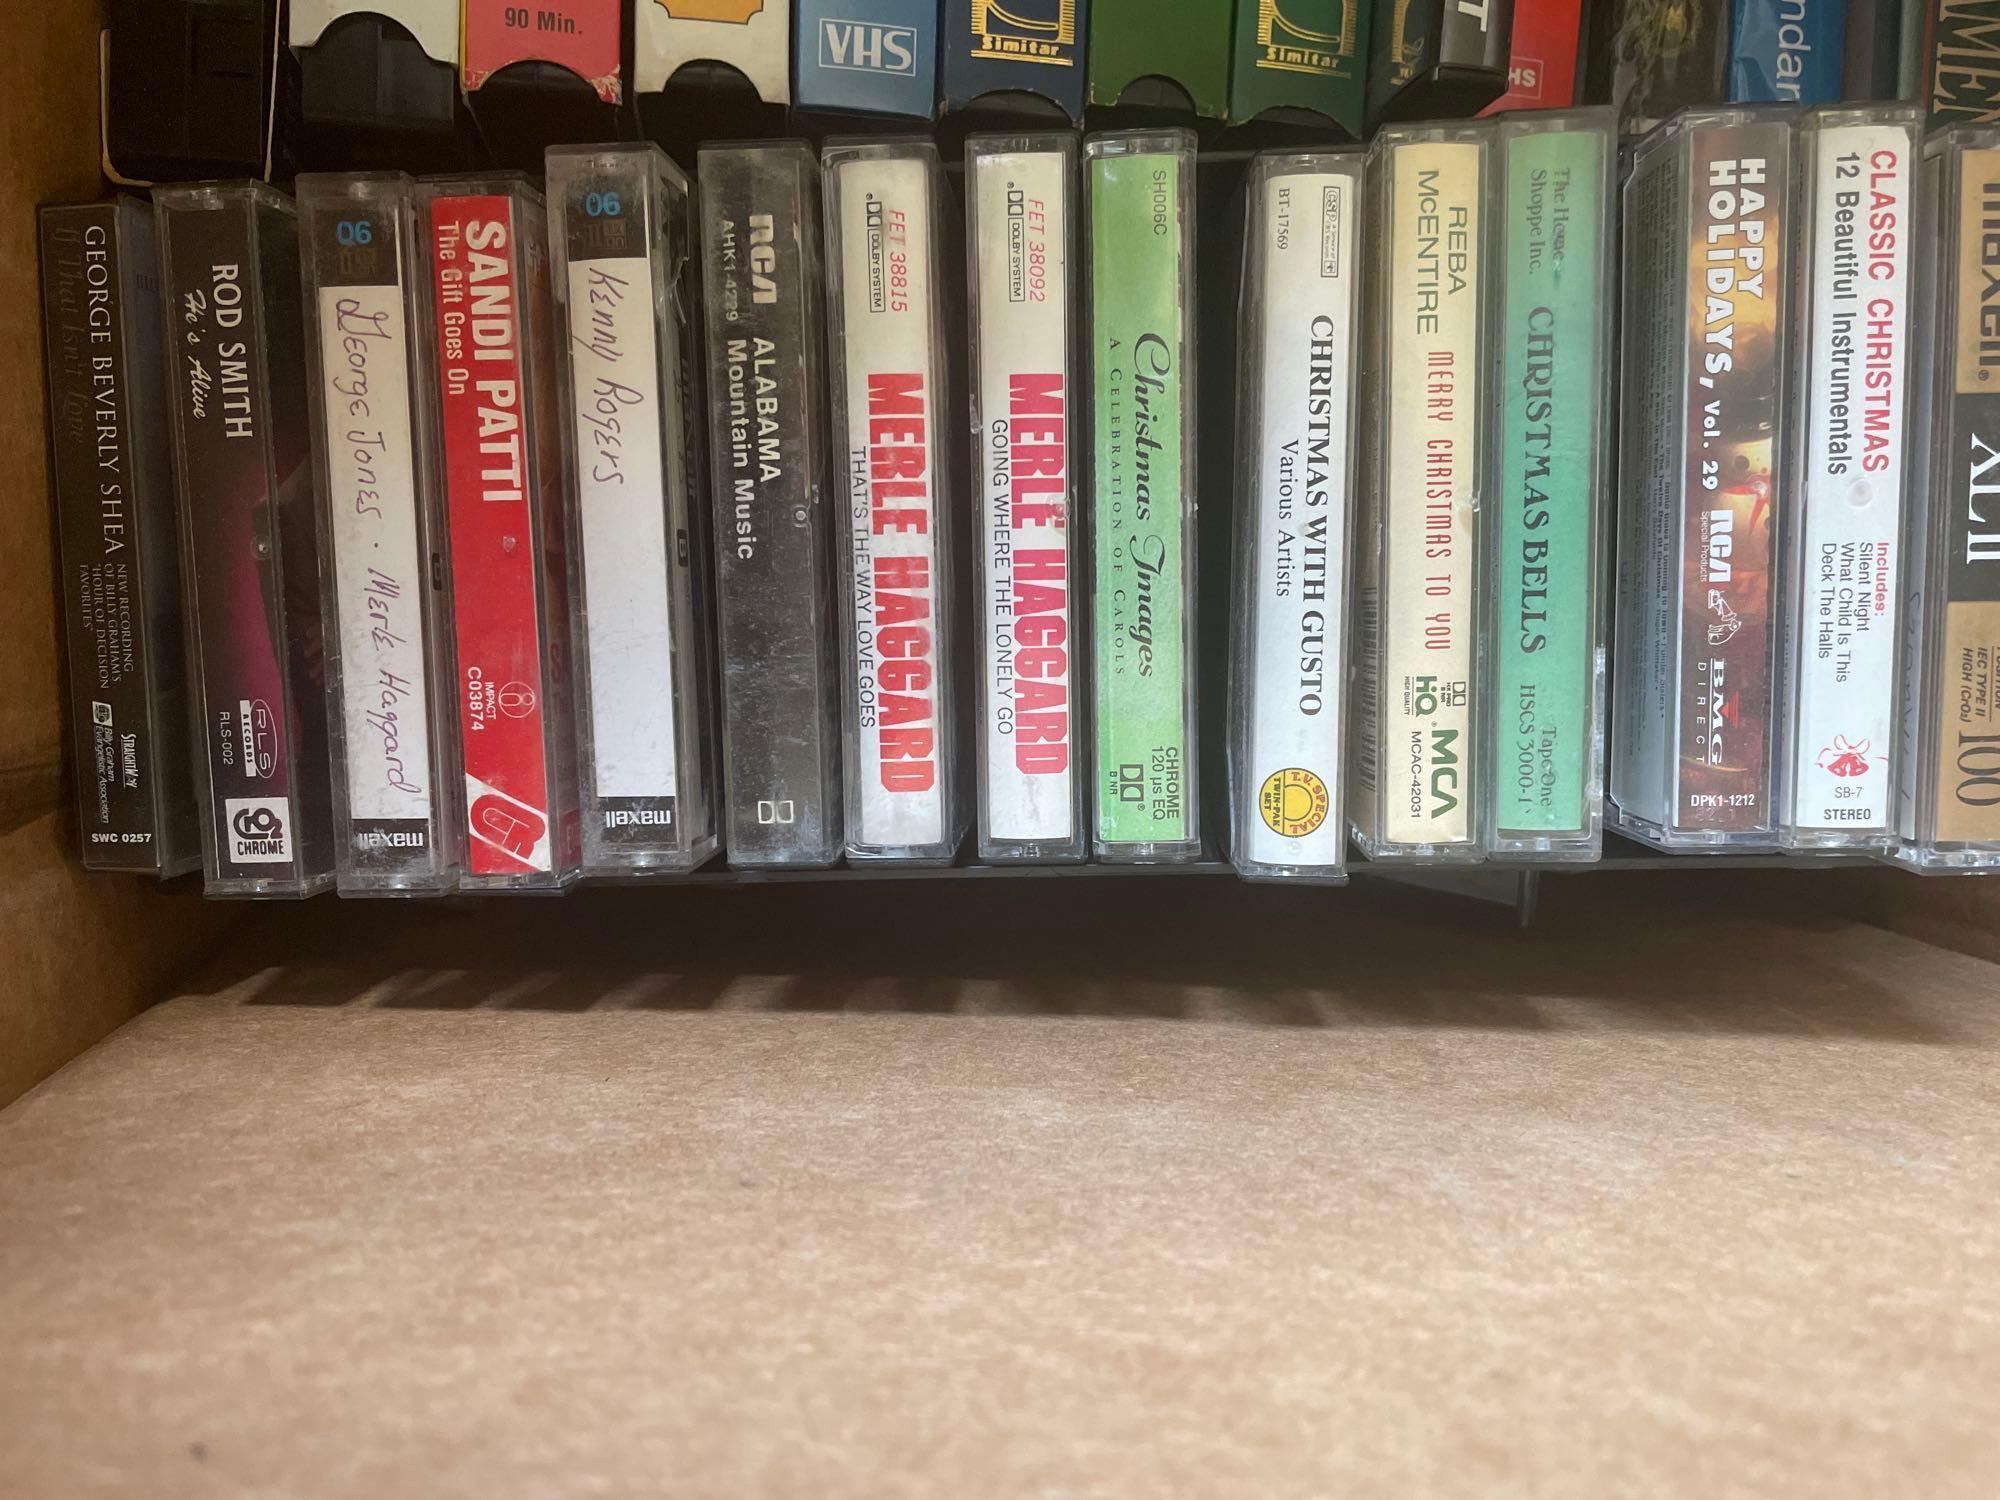 cassette tapes; VHS tapes; CDs